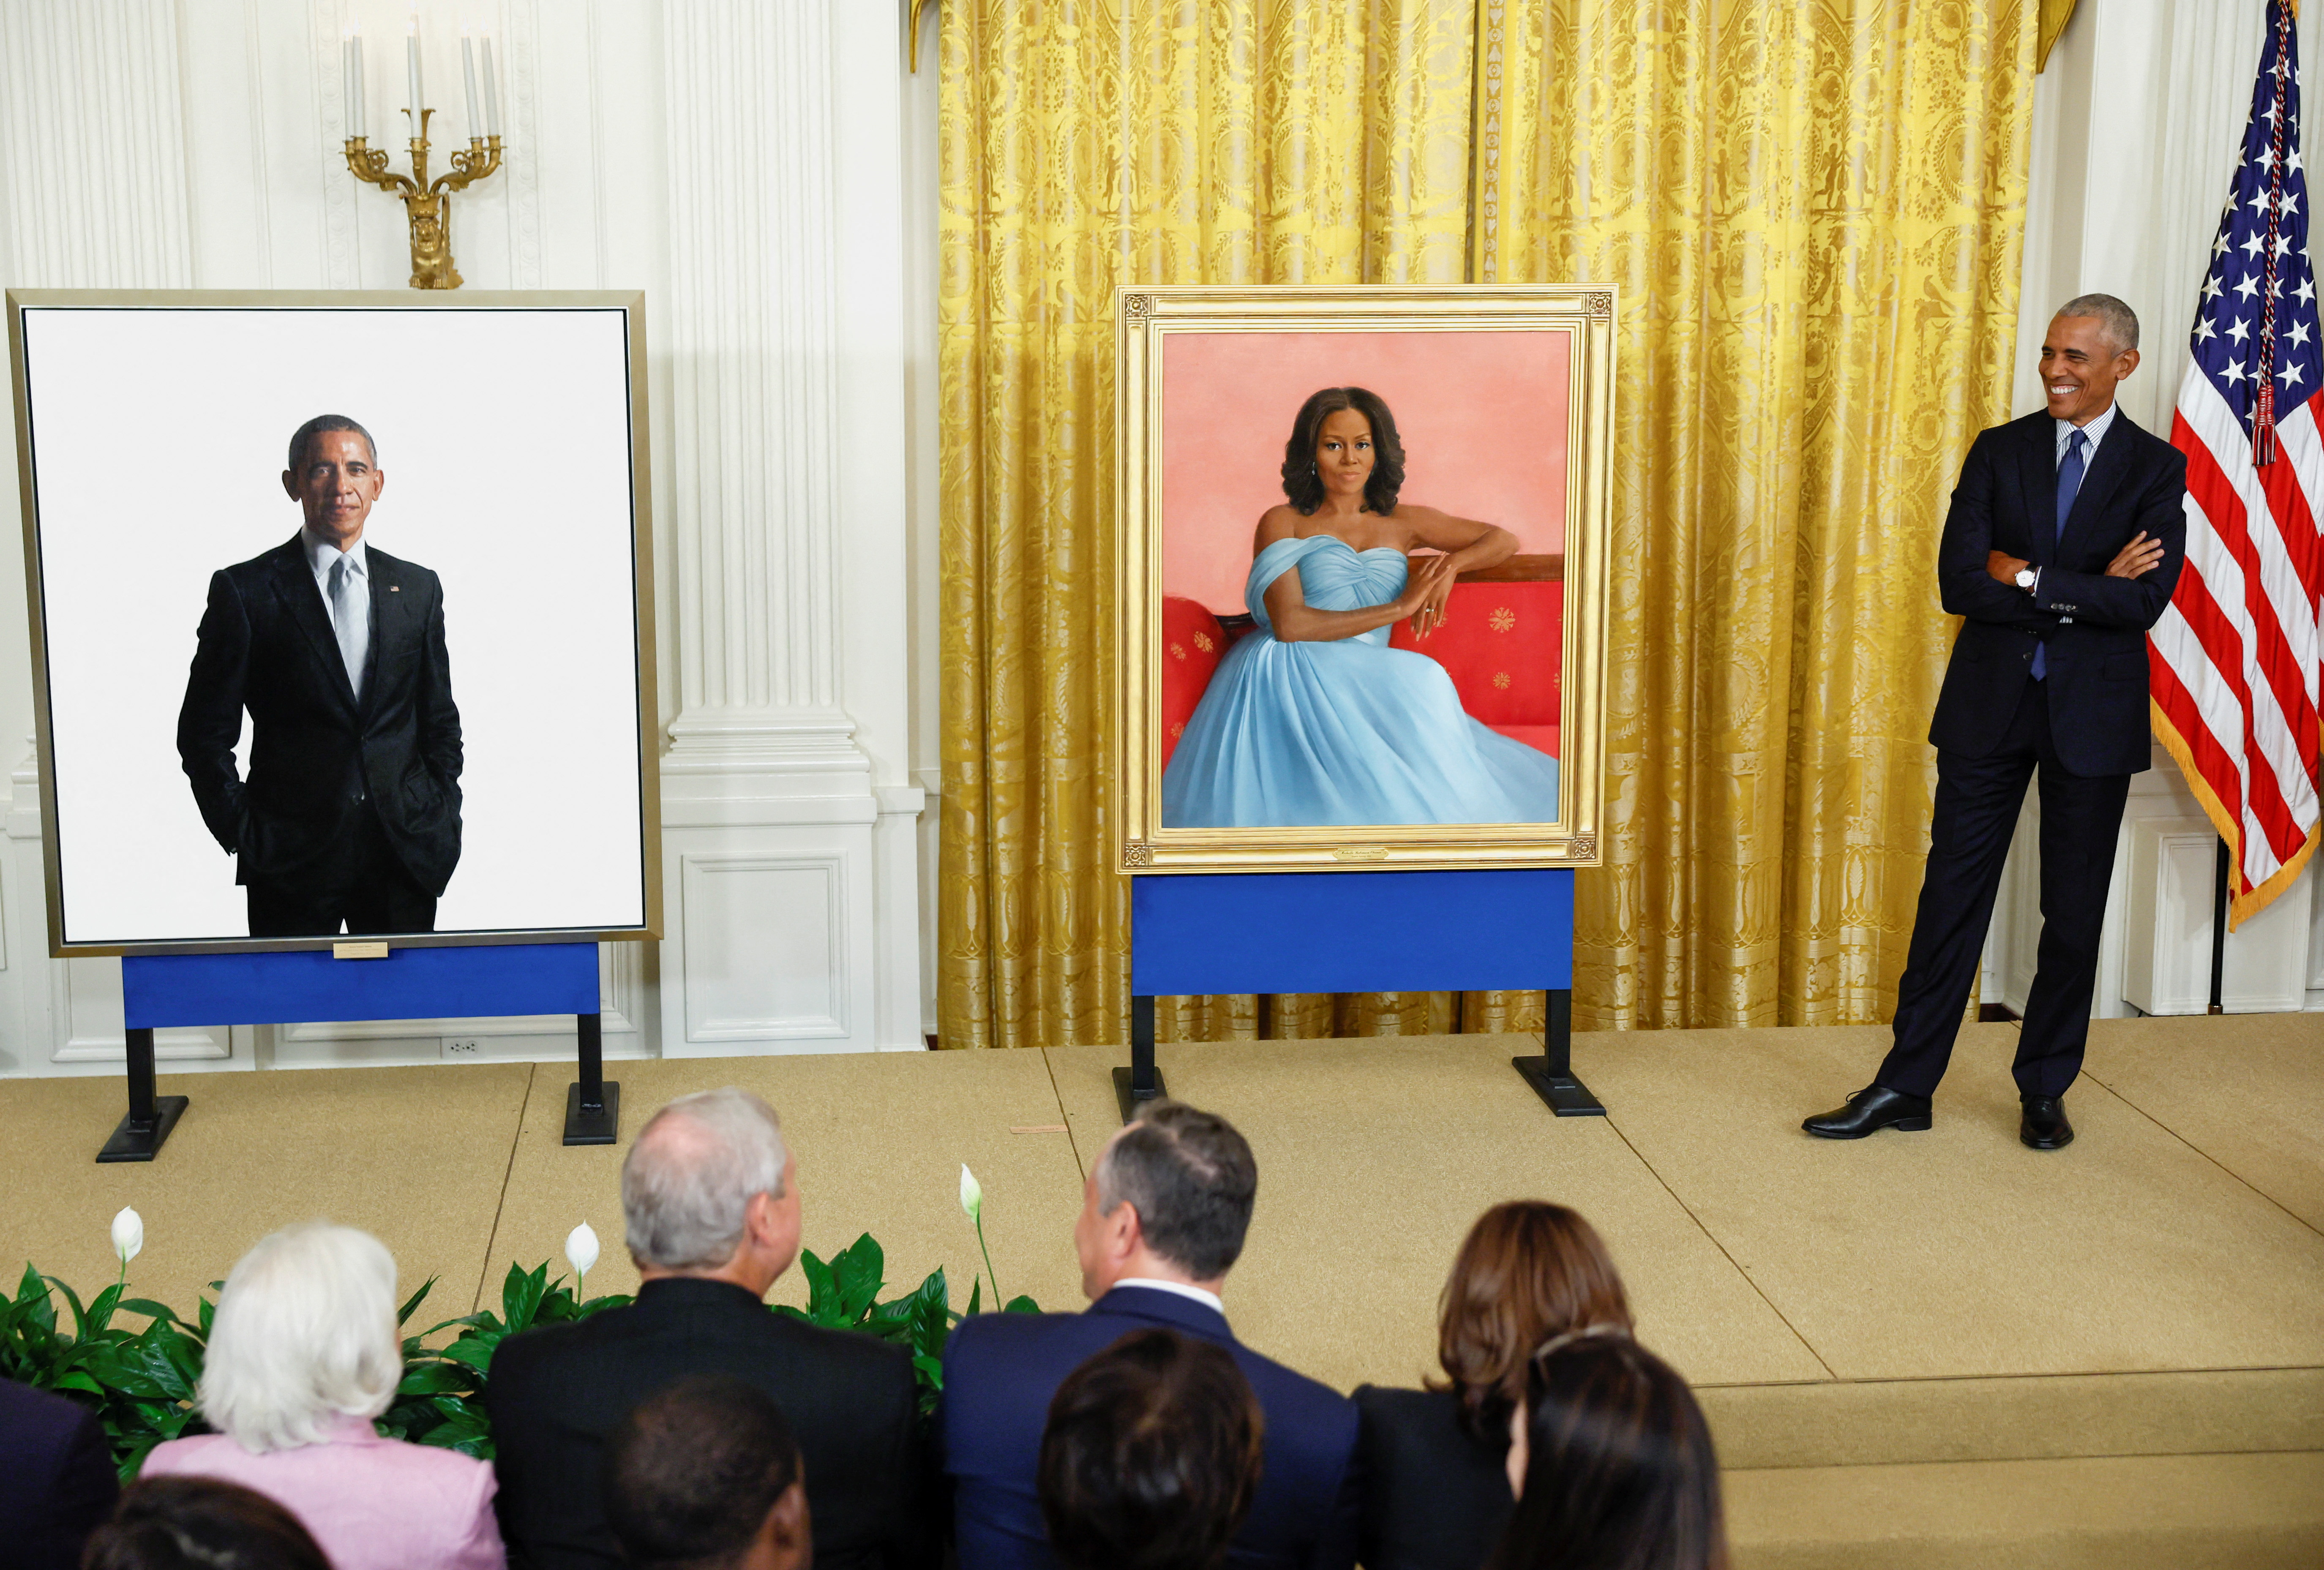 Former U.S. President Barack Obama reacts during the unveiling of his and former first lady Michelle Obama's official White House portraits, painted by Robert McCurdy and Sharon Sprung, respectively, in the East Room of the White House, in Washington, U.S., September, 7, 2022. REUTERS/Evelyn Hockstein